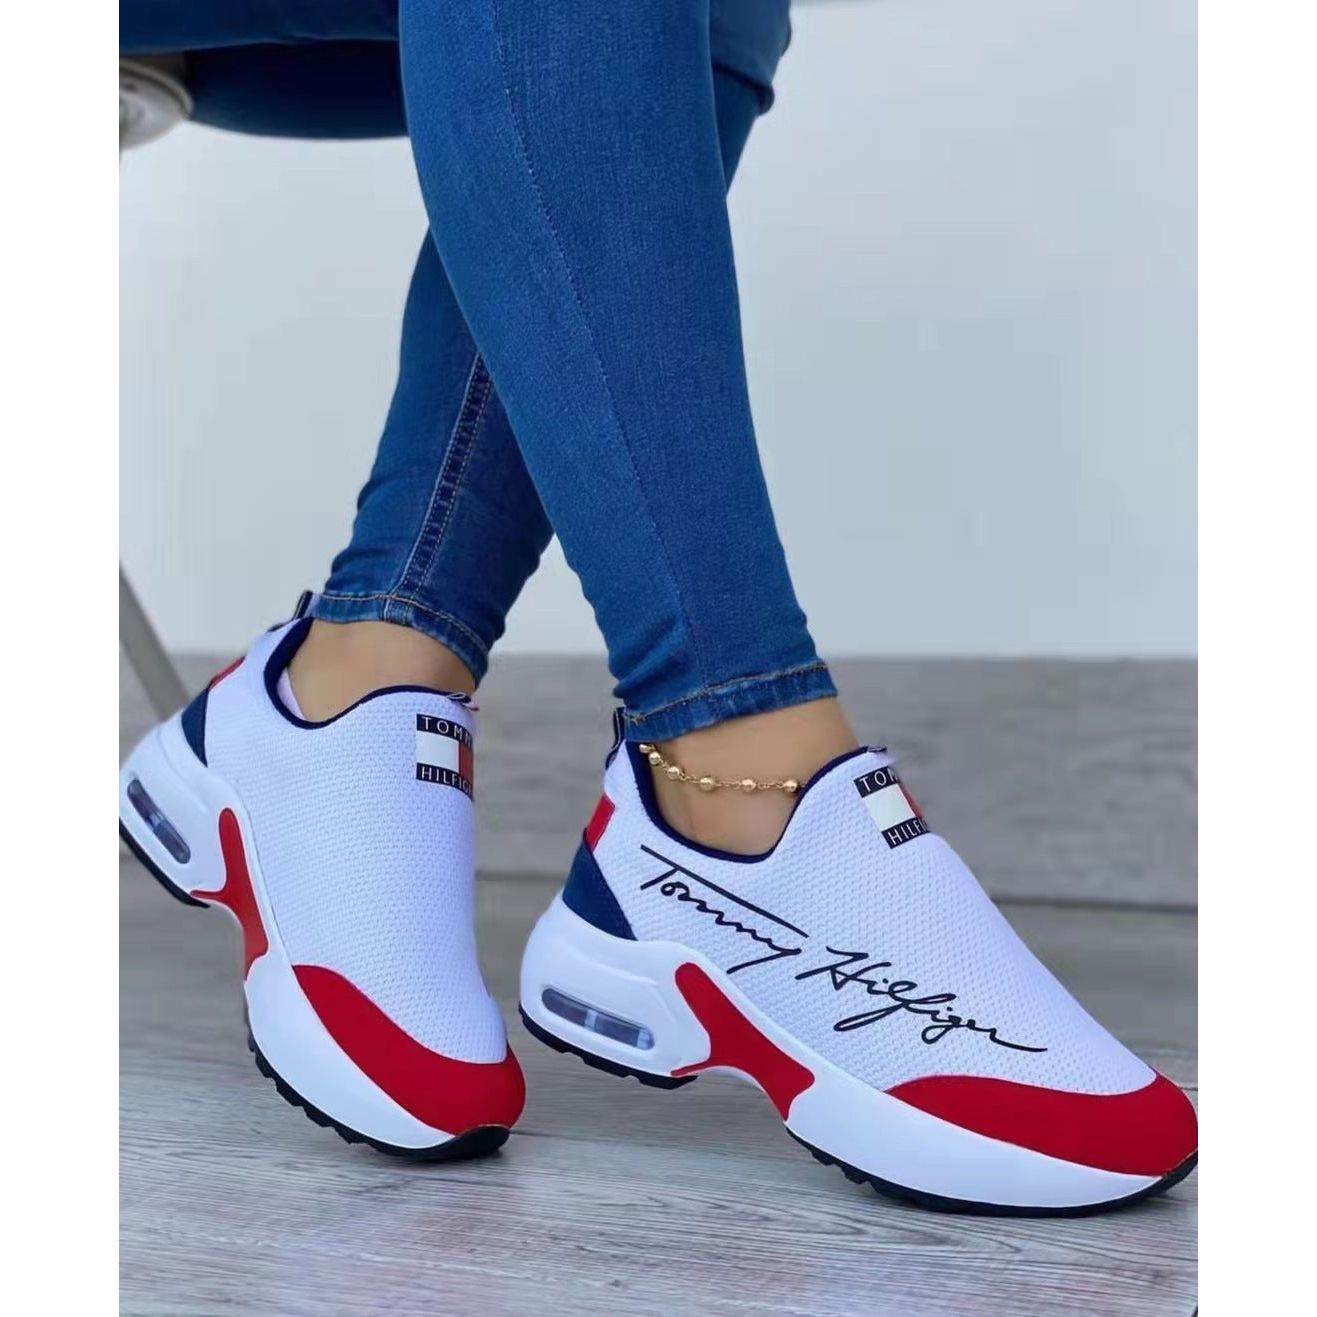 Buy Online Premimum Quality, Trendy and Highly Comfortable Air Cushion Sneakers For Women - FEYONAS